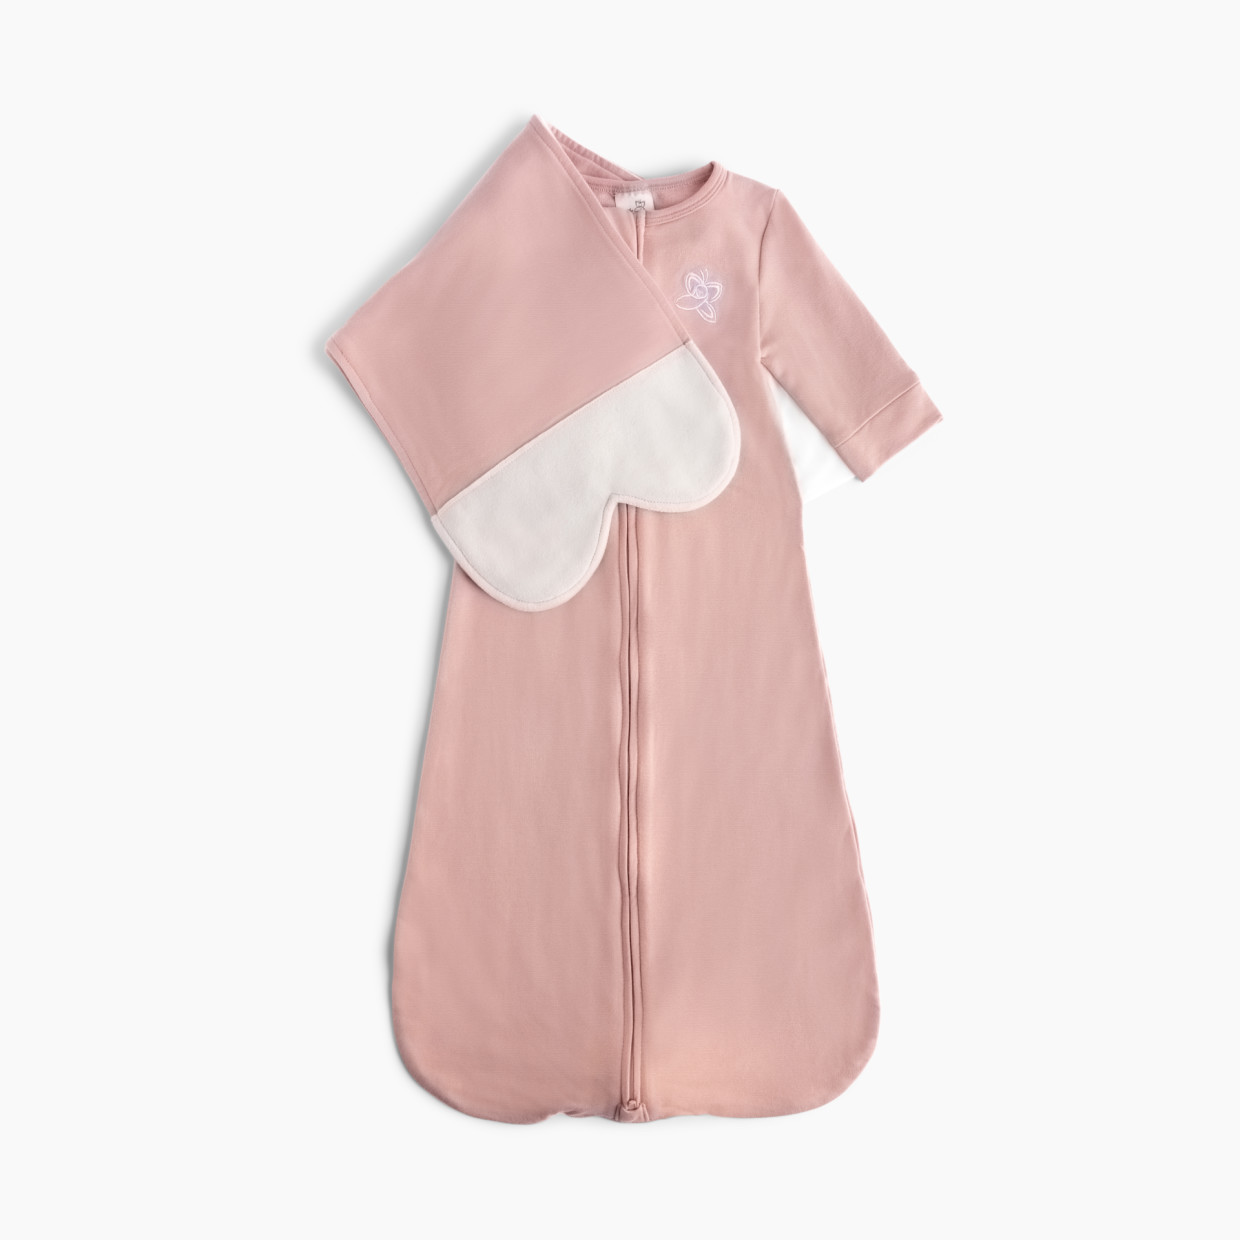 The Butterfly Swaddle Swaddle and Transitional Sleep Sack in One - Blushing Pink, Med/Large (12 -17 Lbs).